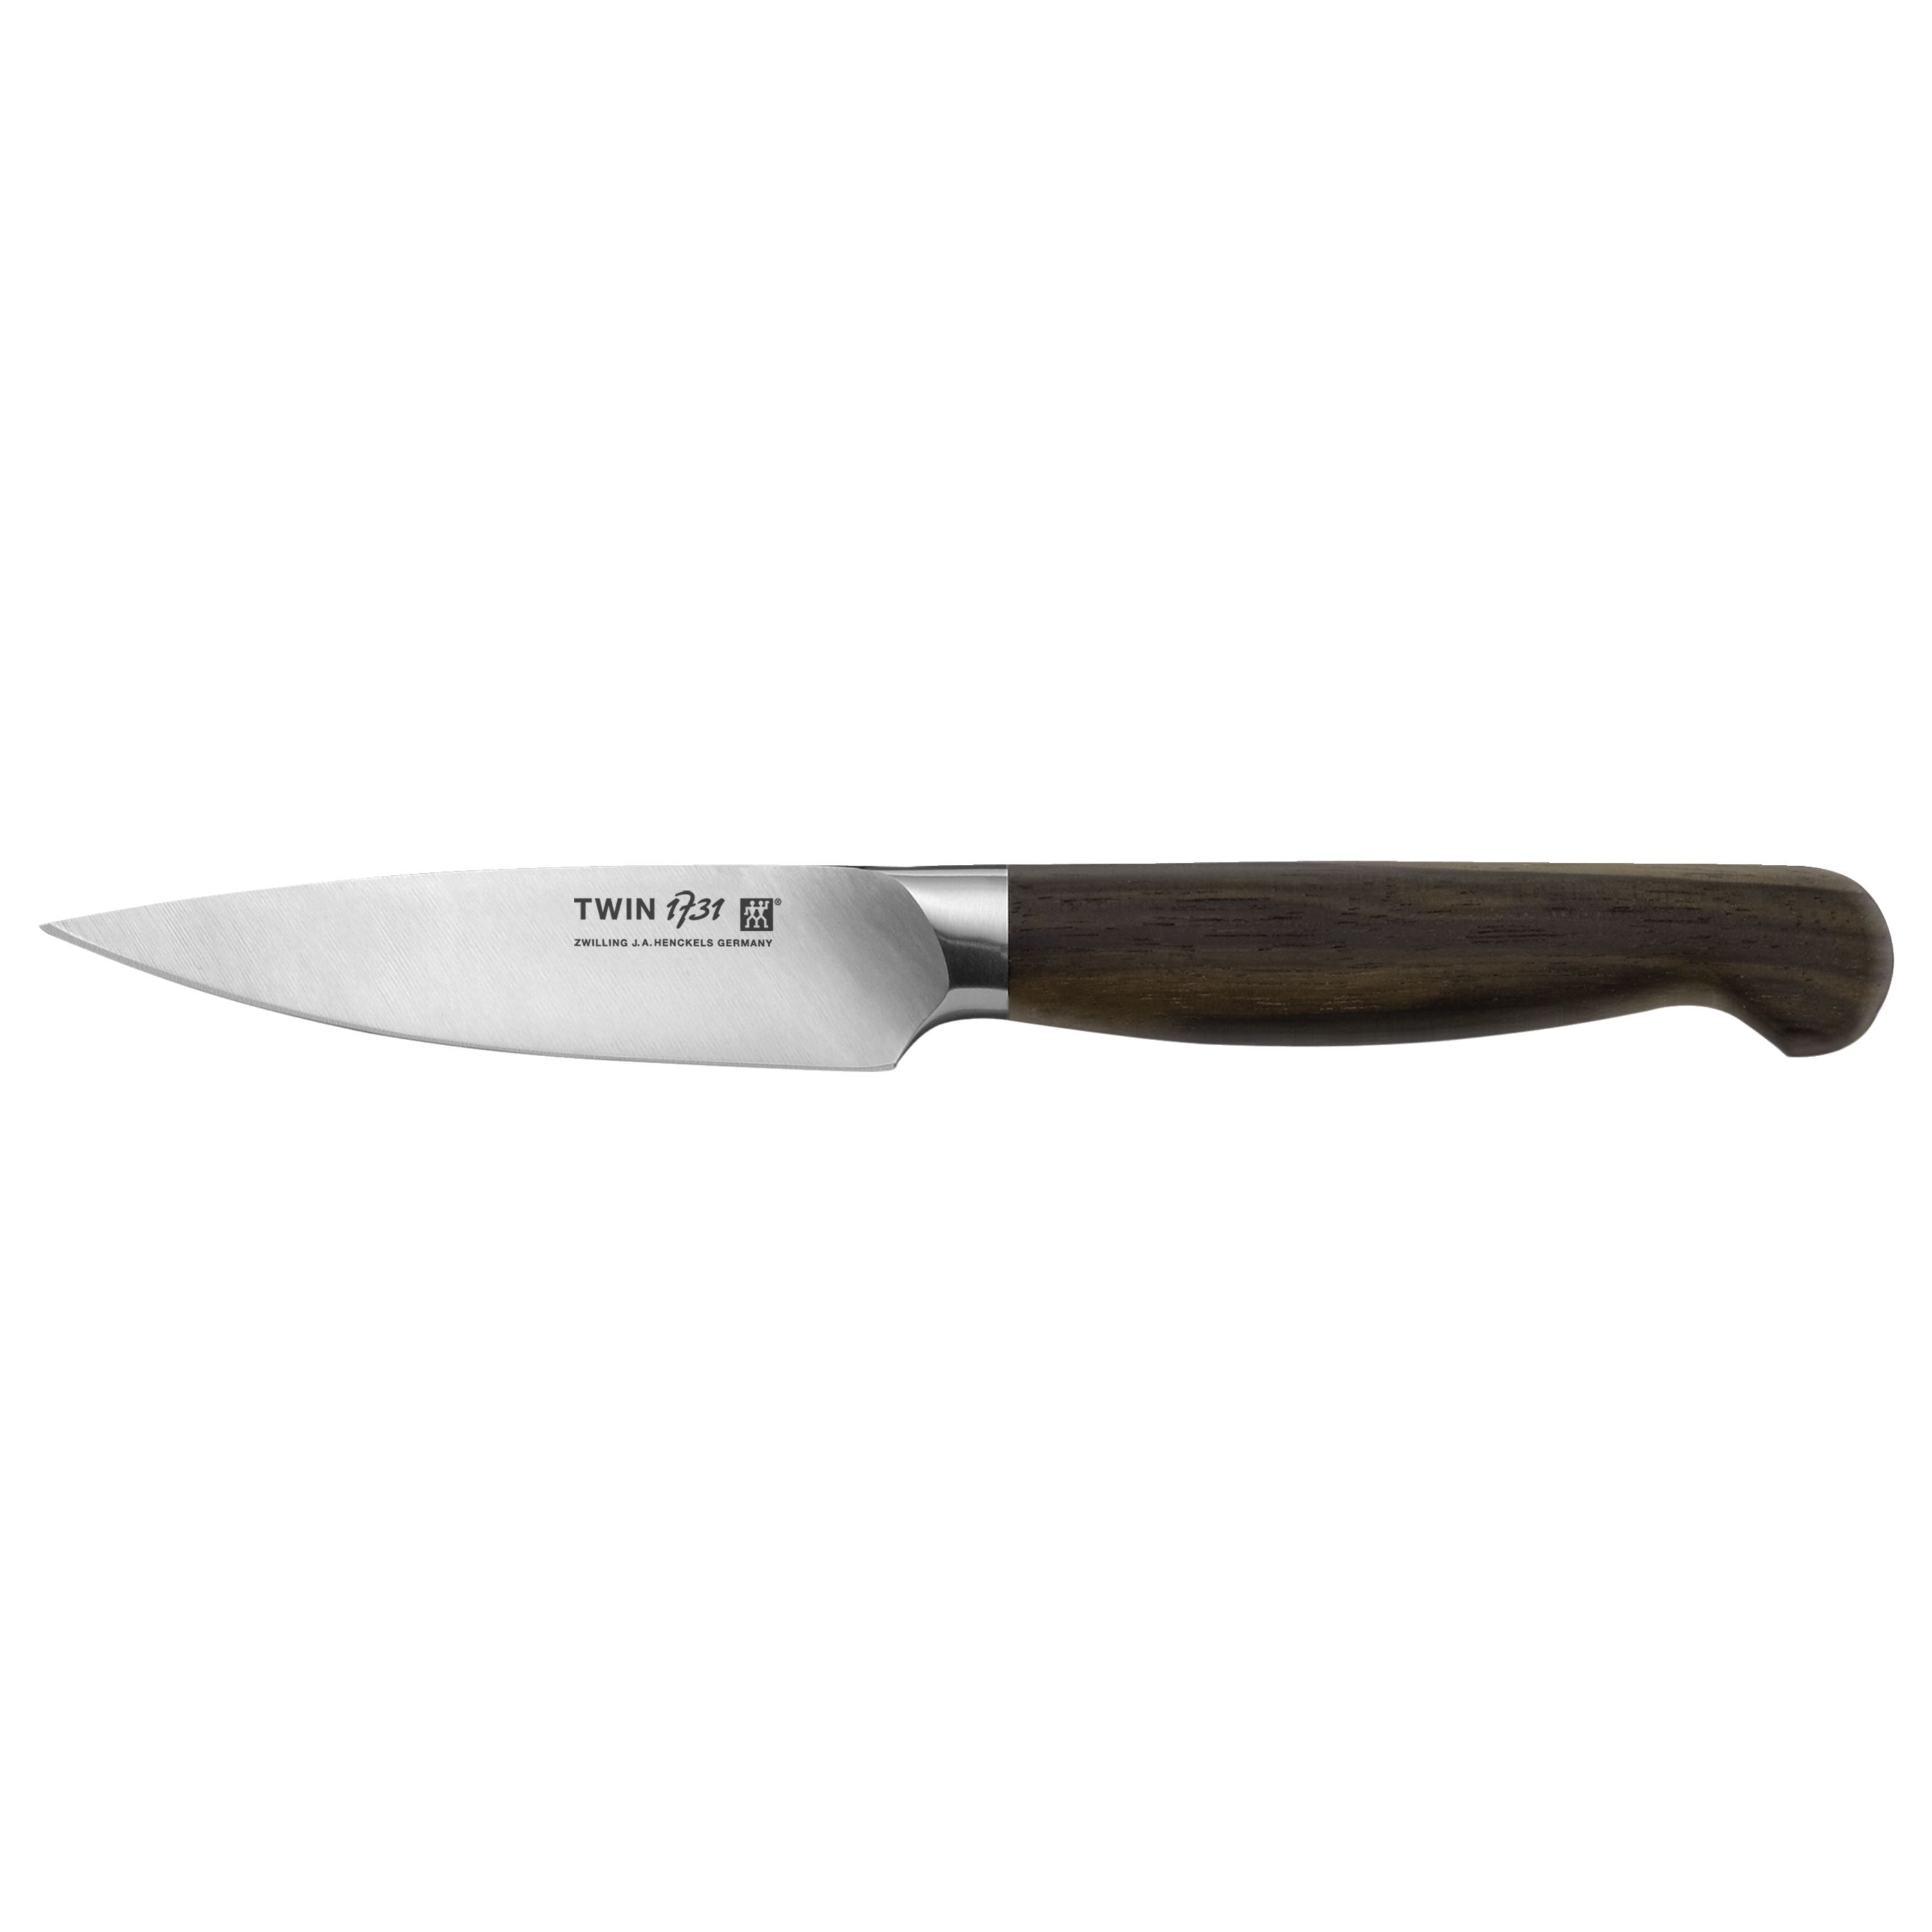 Buy ZWILLING TWIN 1731 Paring knife | ZWILLING.COM